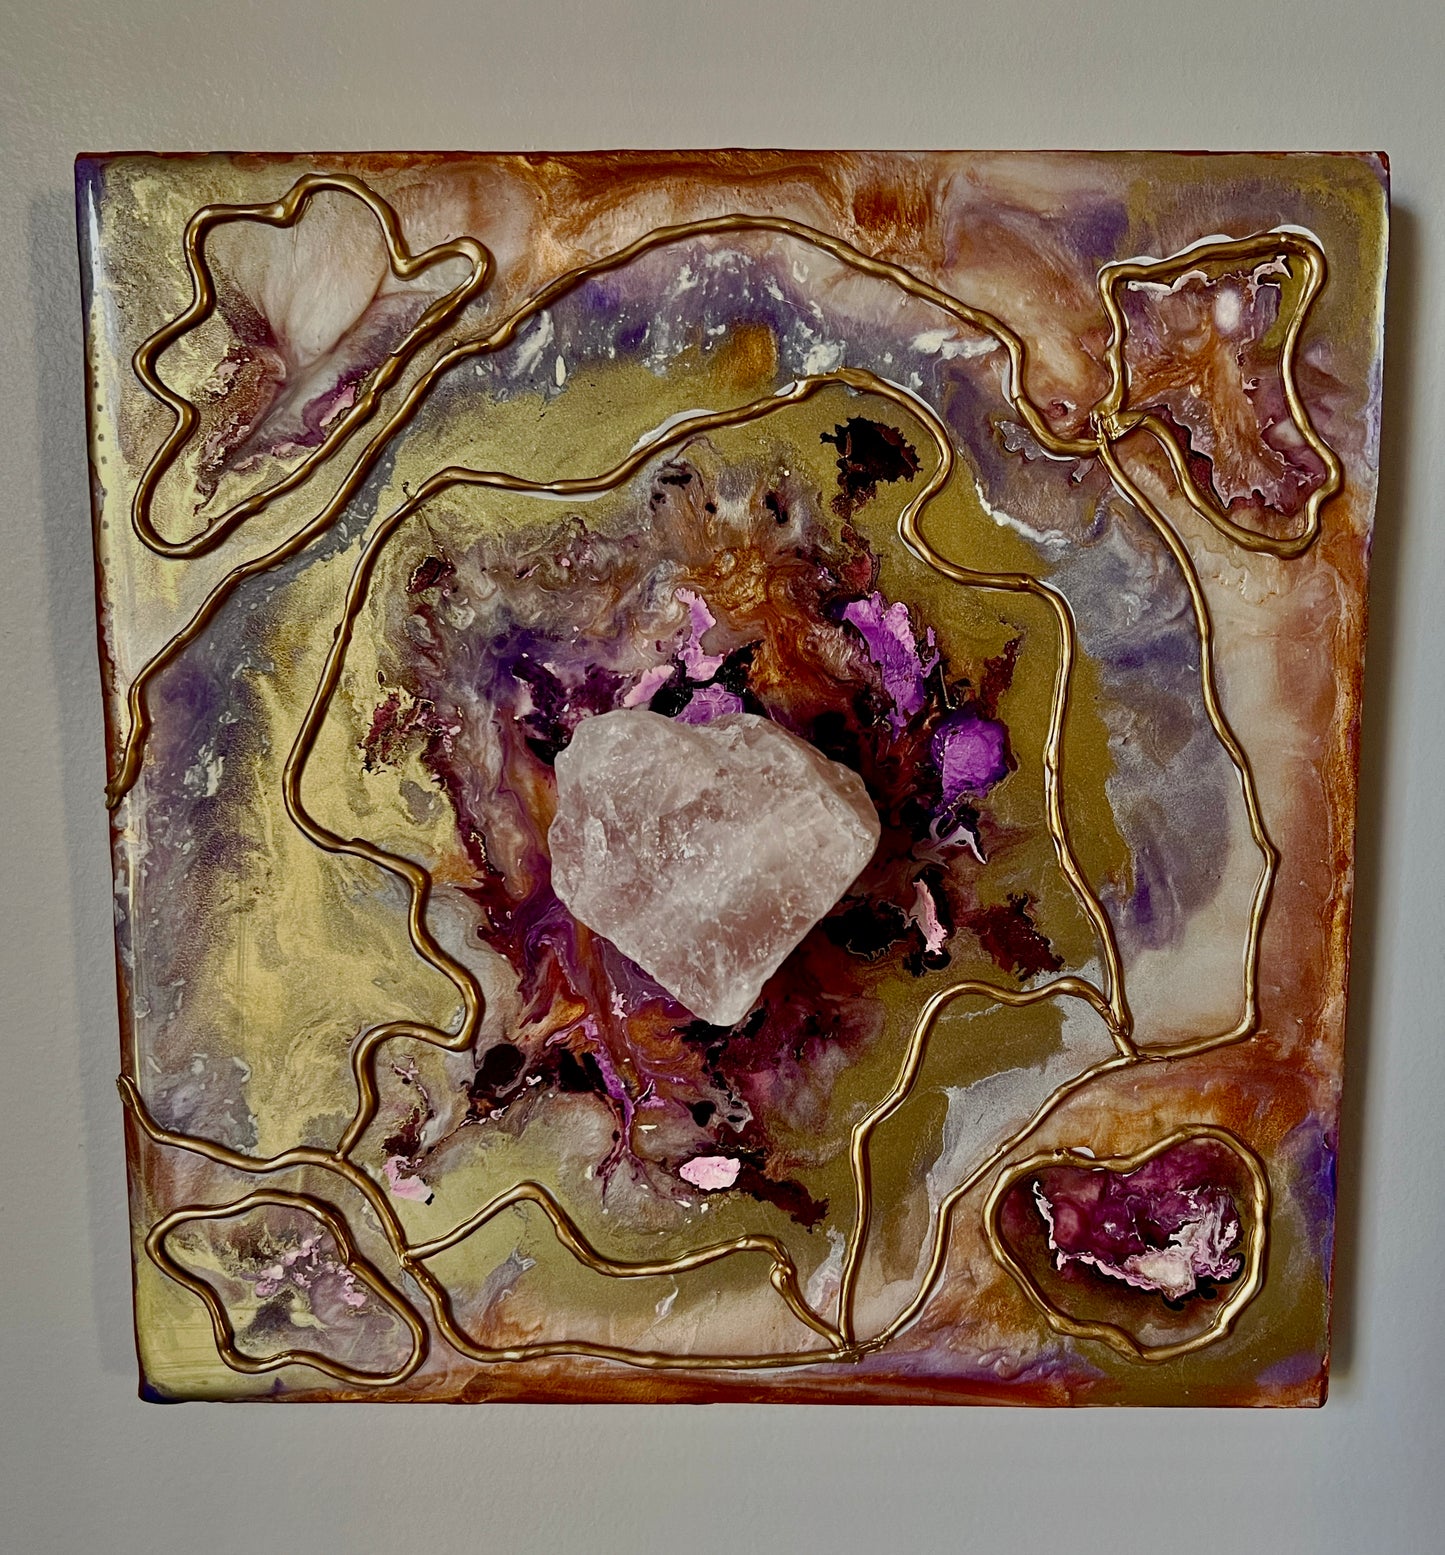 LOVE YOURSELF FIRST / Raw Rose Quartz / Geode Inspired Wall Art / One of a Kind / Resin Art